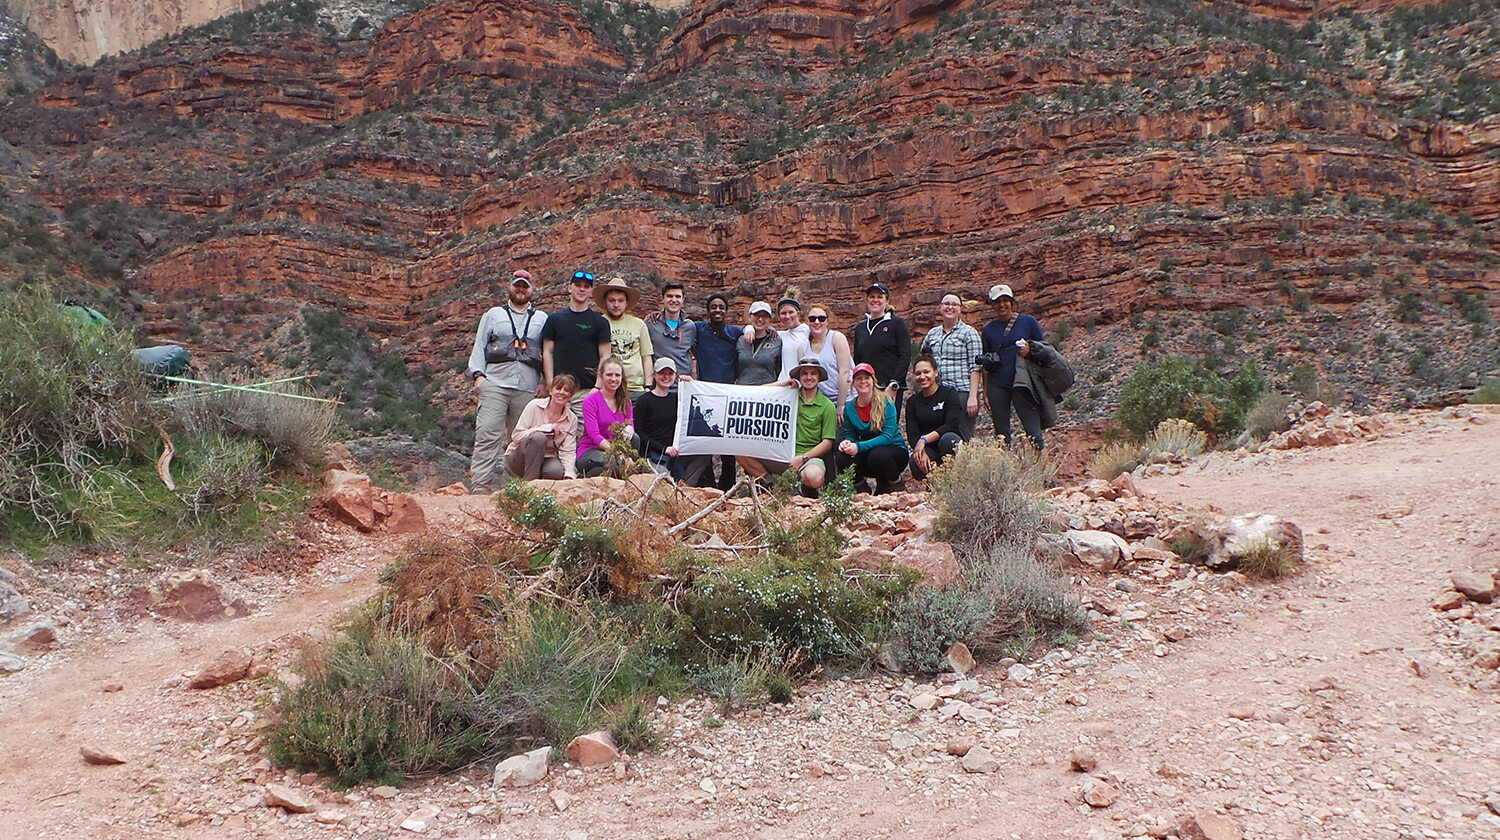 Group of students outdoors, holding a banner for Outdoor Pursuits